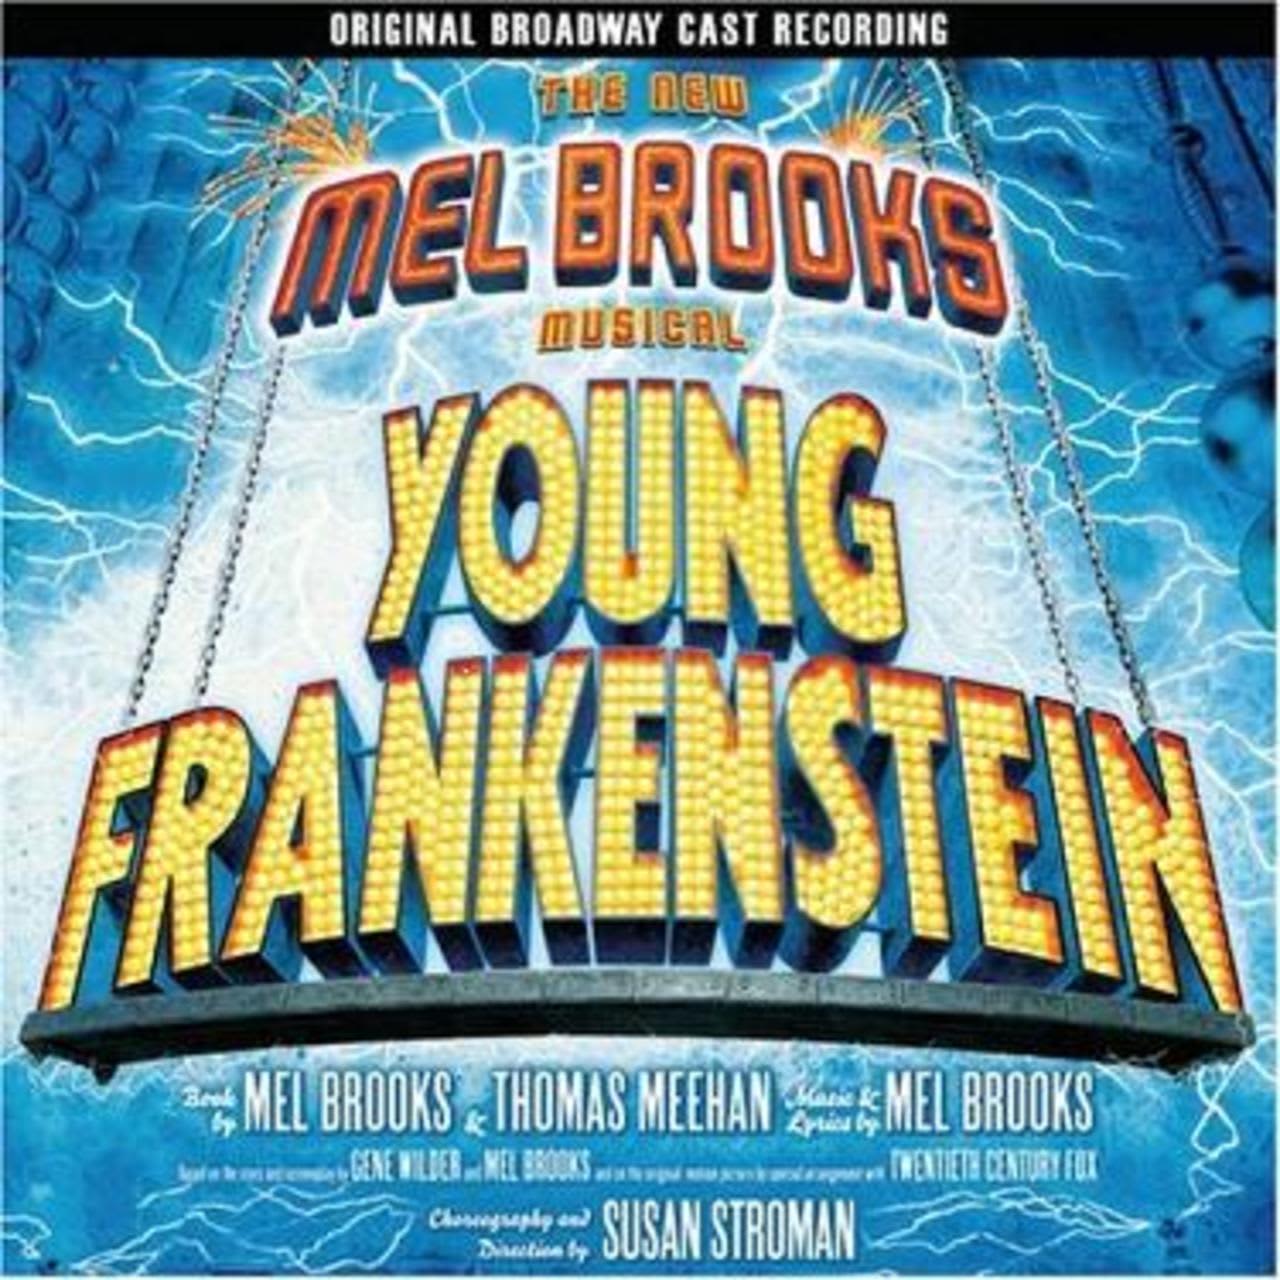 Wilton High School students will put on a production of Mel Brooks' comedy musical "Young Frankenstein" March 1, 3, 4 and 5.